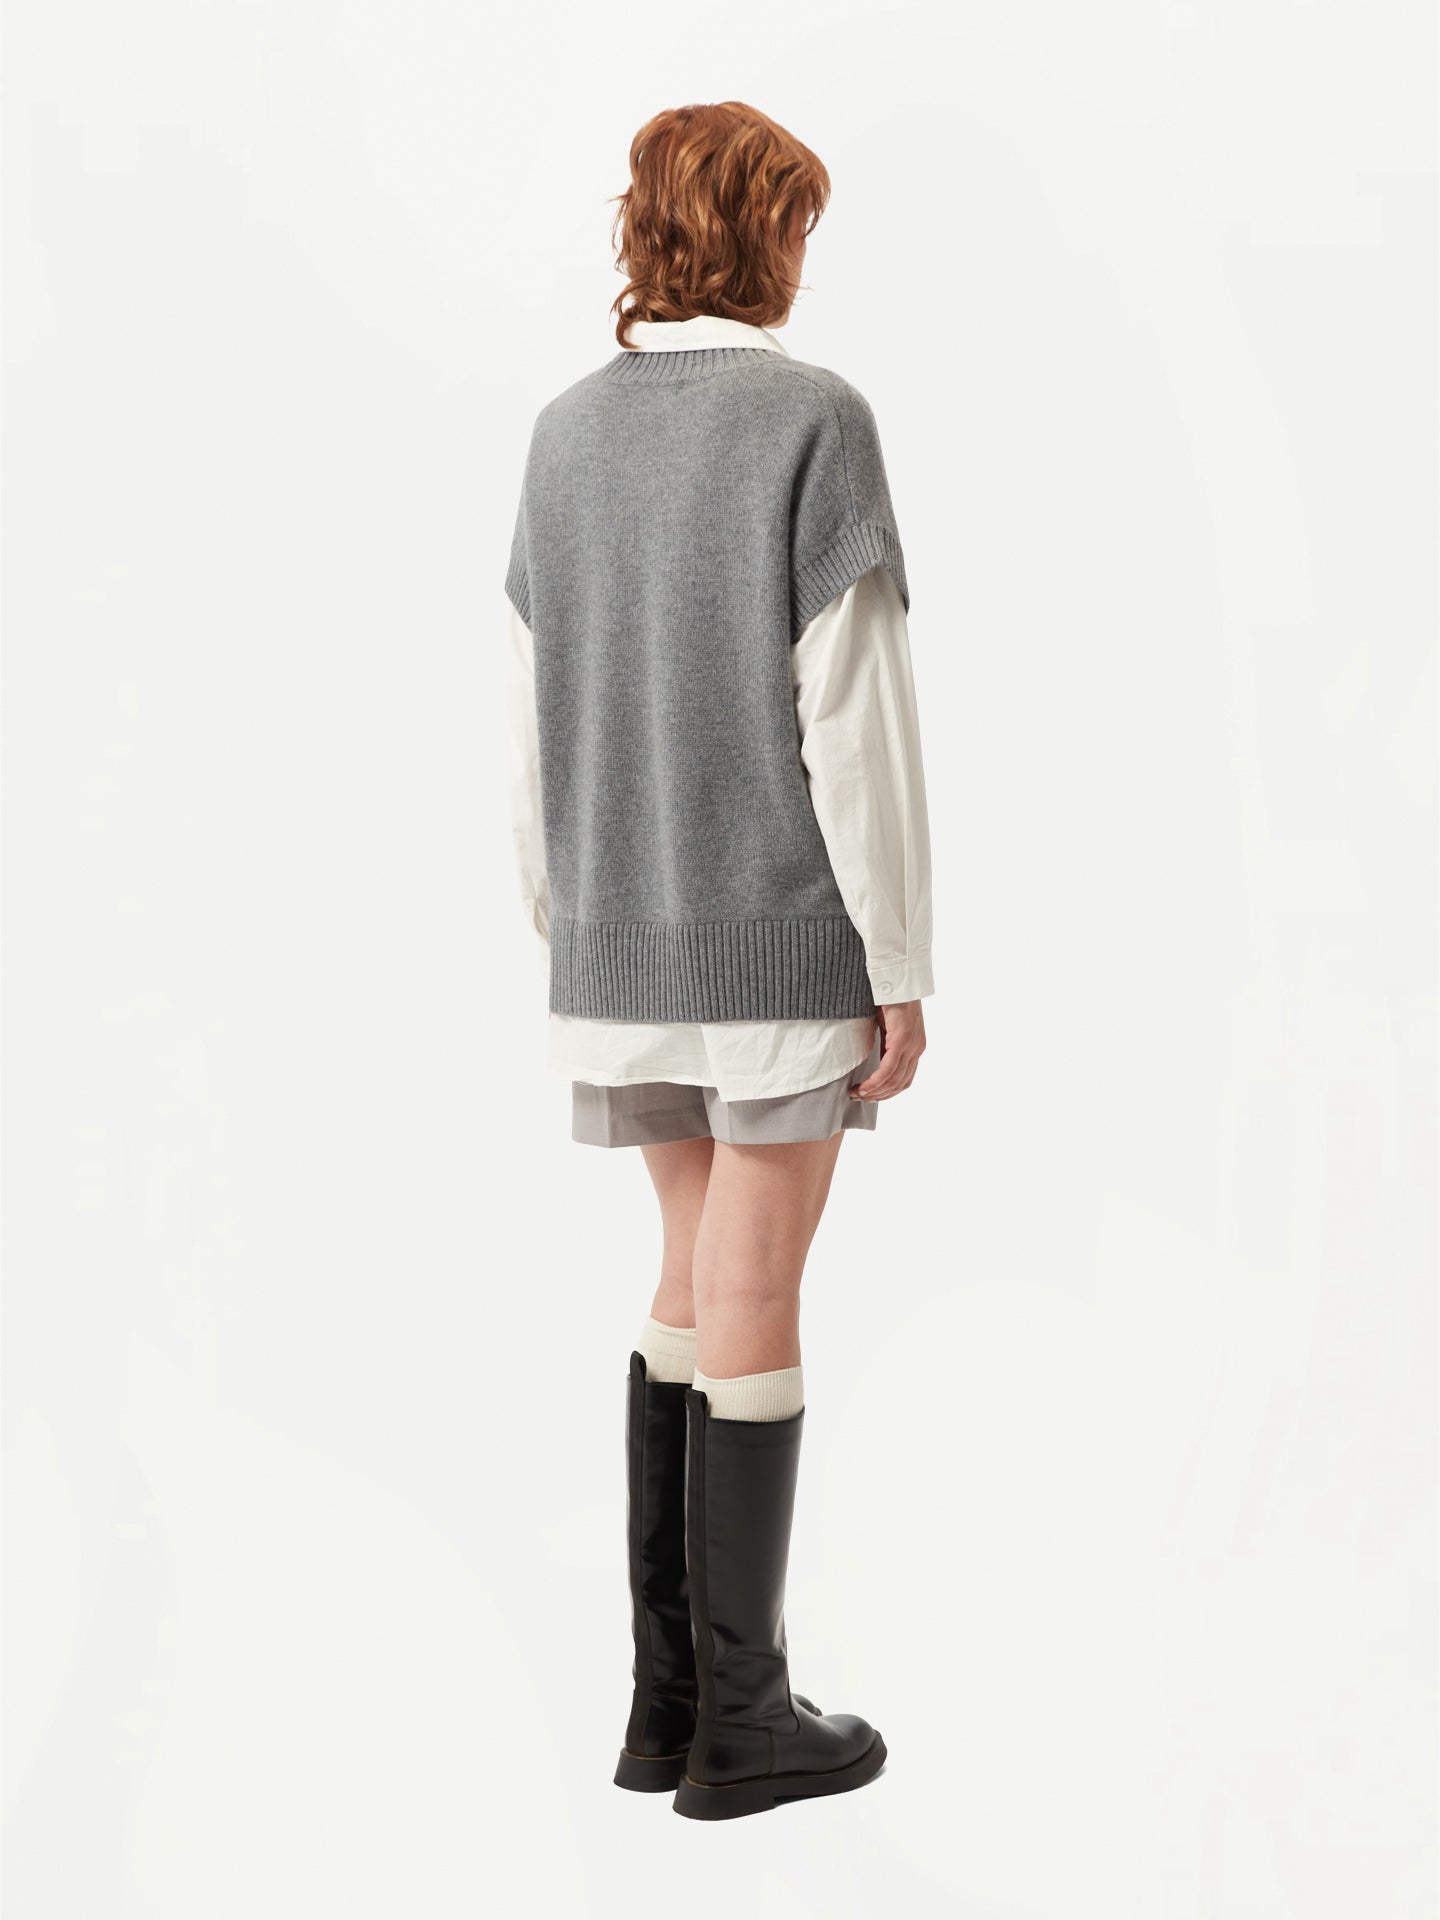 Women's Cashmere V-Neck Sweater with Short Sleeves Dim Gray - Gobi Cashmere